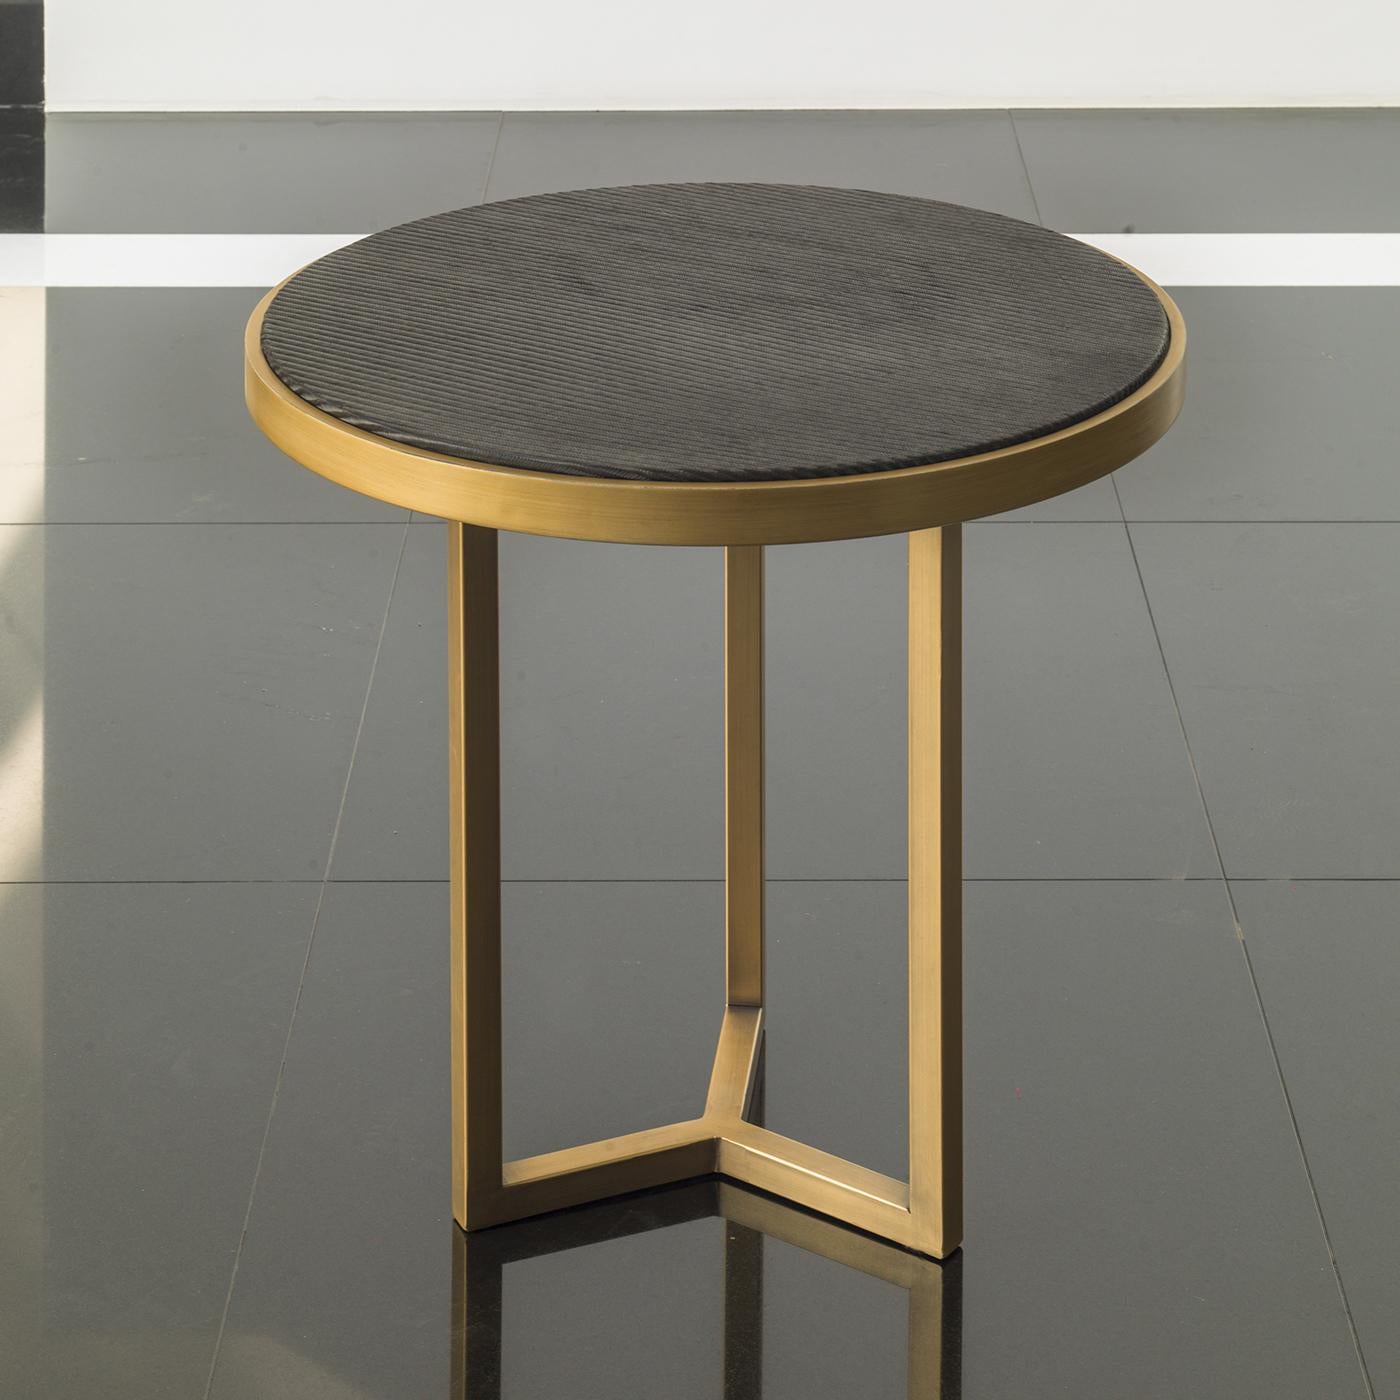 Complete a chic vibe in a contemporary lounge area or living room with the Romeo black and gold side table. Designed by Chiara Provasi, the round side table stands on a glistening gold base and features a simple black top in lacquered wood. Thanks